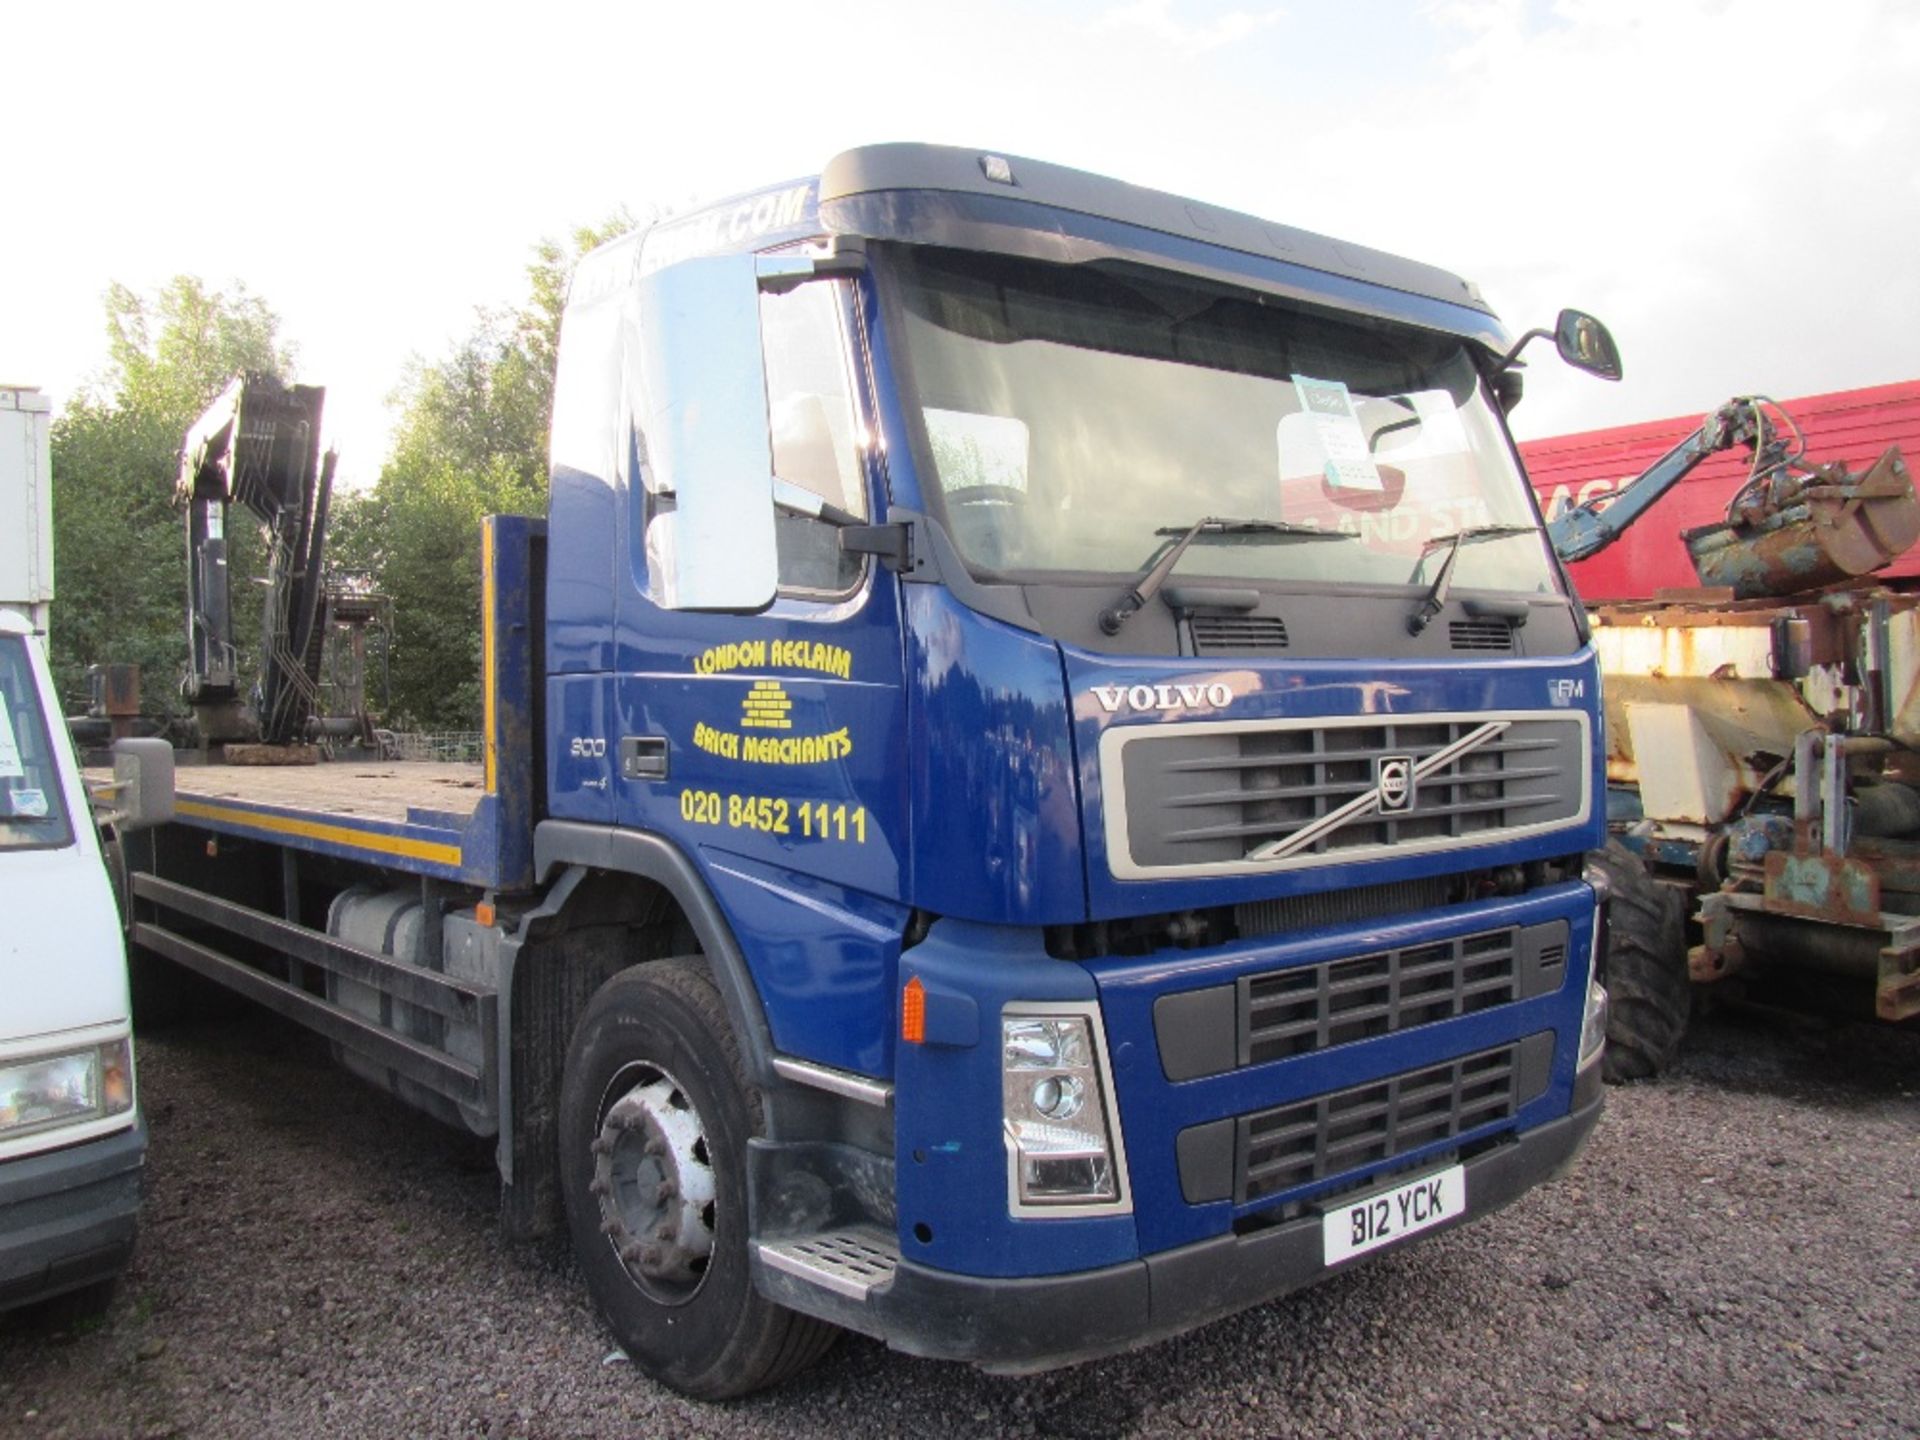 2008 Volvo FM9 6x2 Crane Lorry with Hiab Double Extension Crane, Rear Lift Axle. NUMBER PLATE NOT - Image 3 of 9